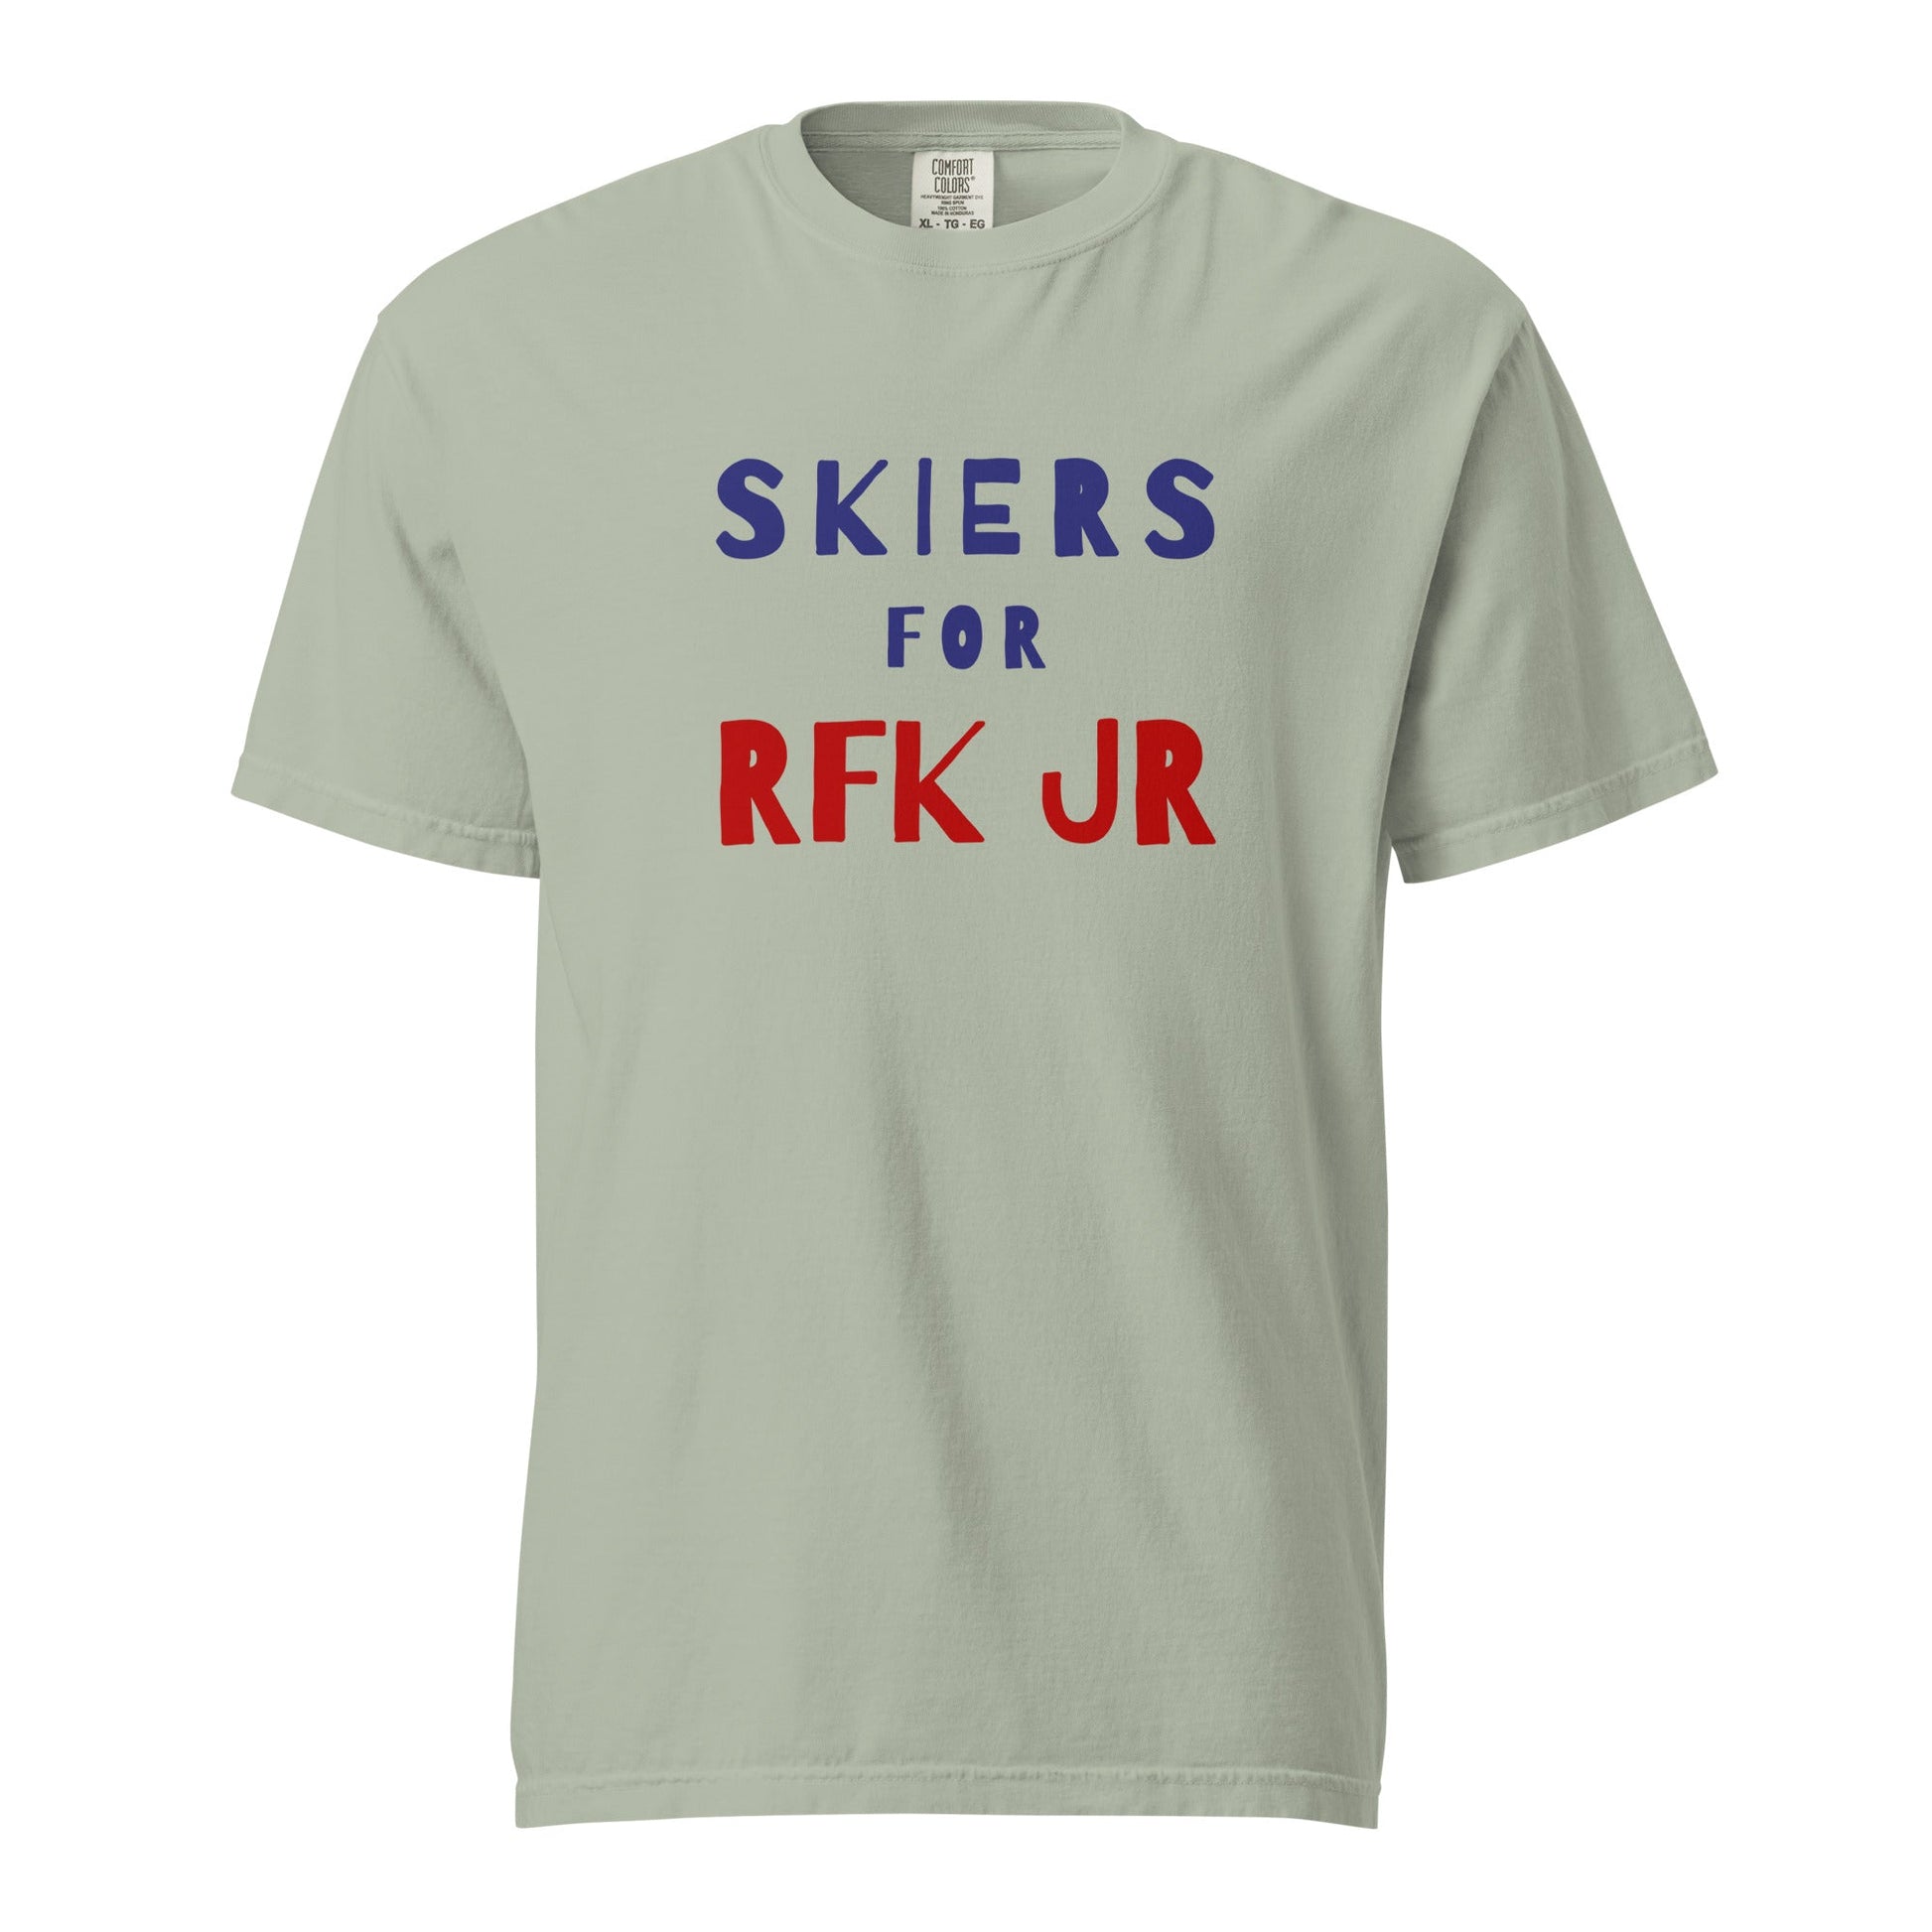 Skiers for RFK Jr. Unisex Heavyweight Tee - TEAM KENNEDY. All rights reserved